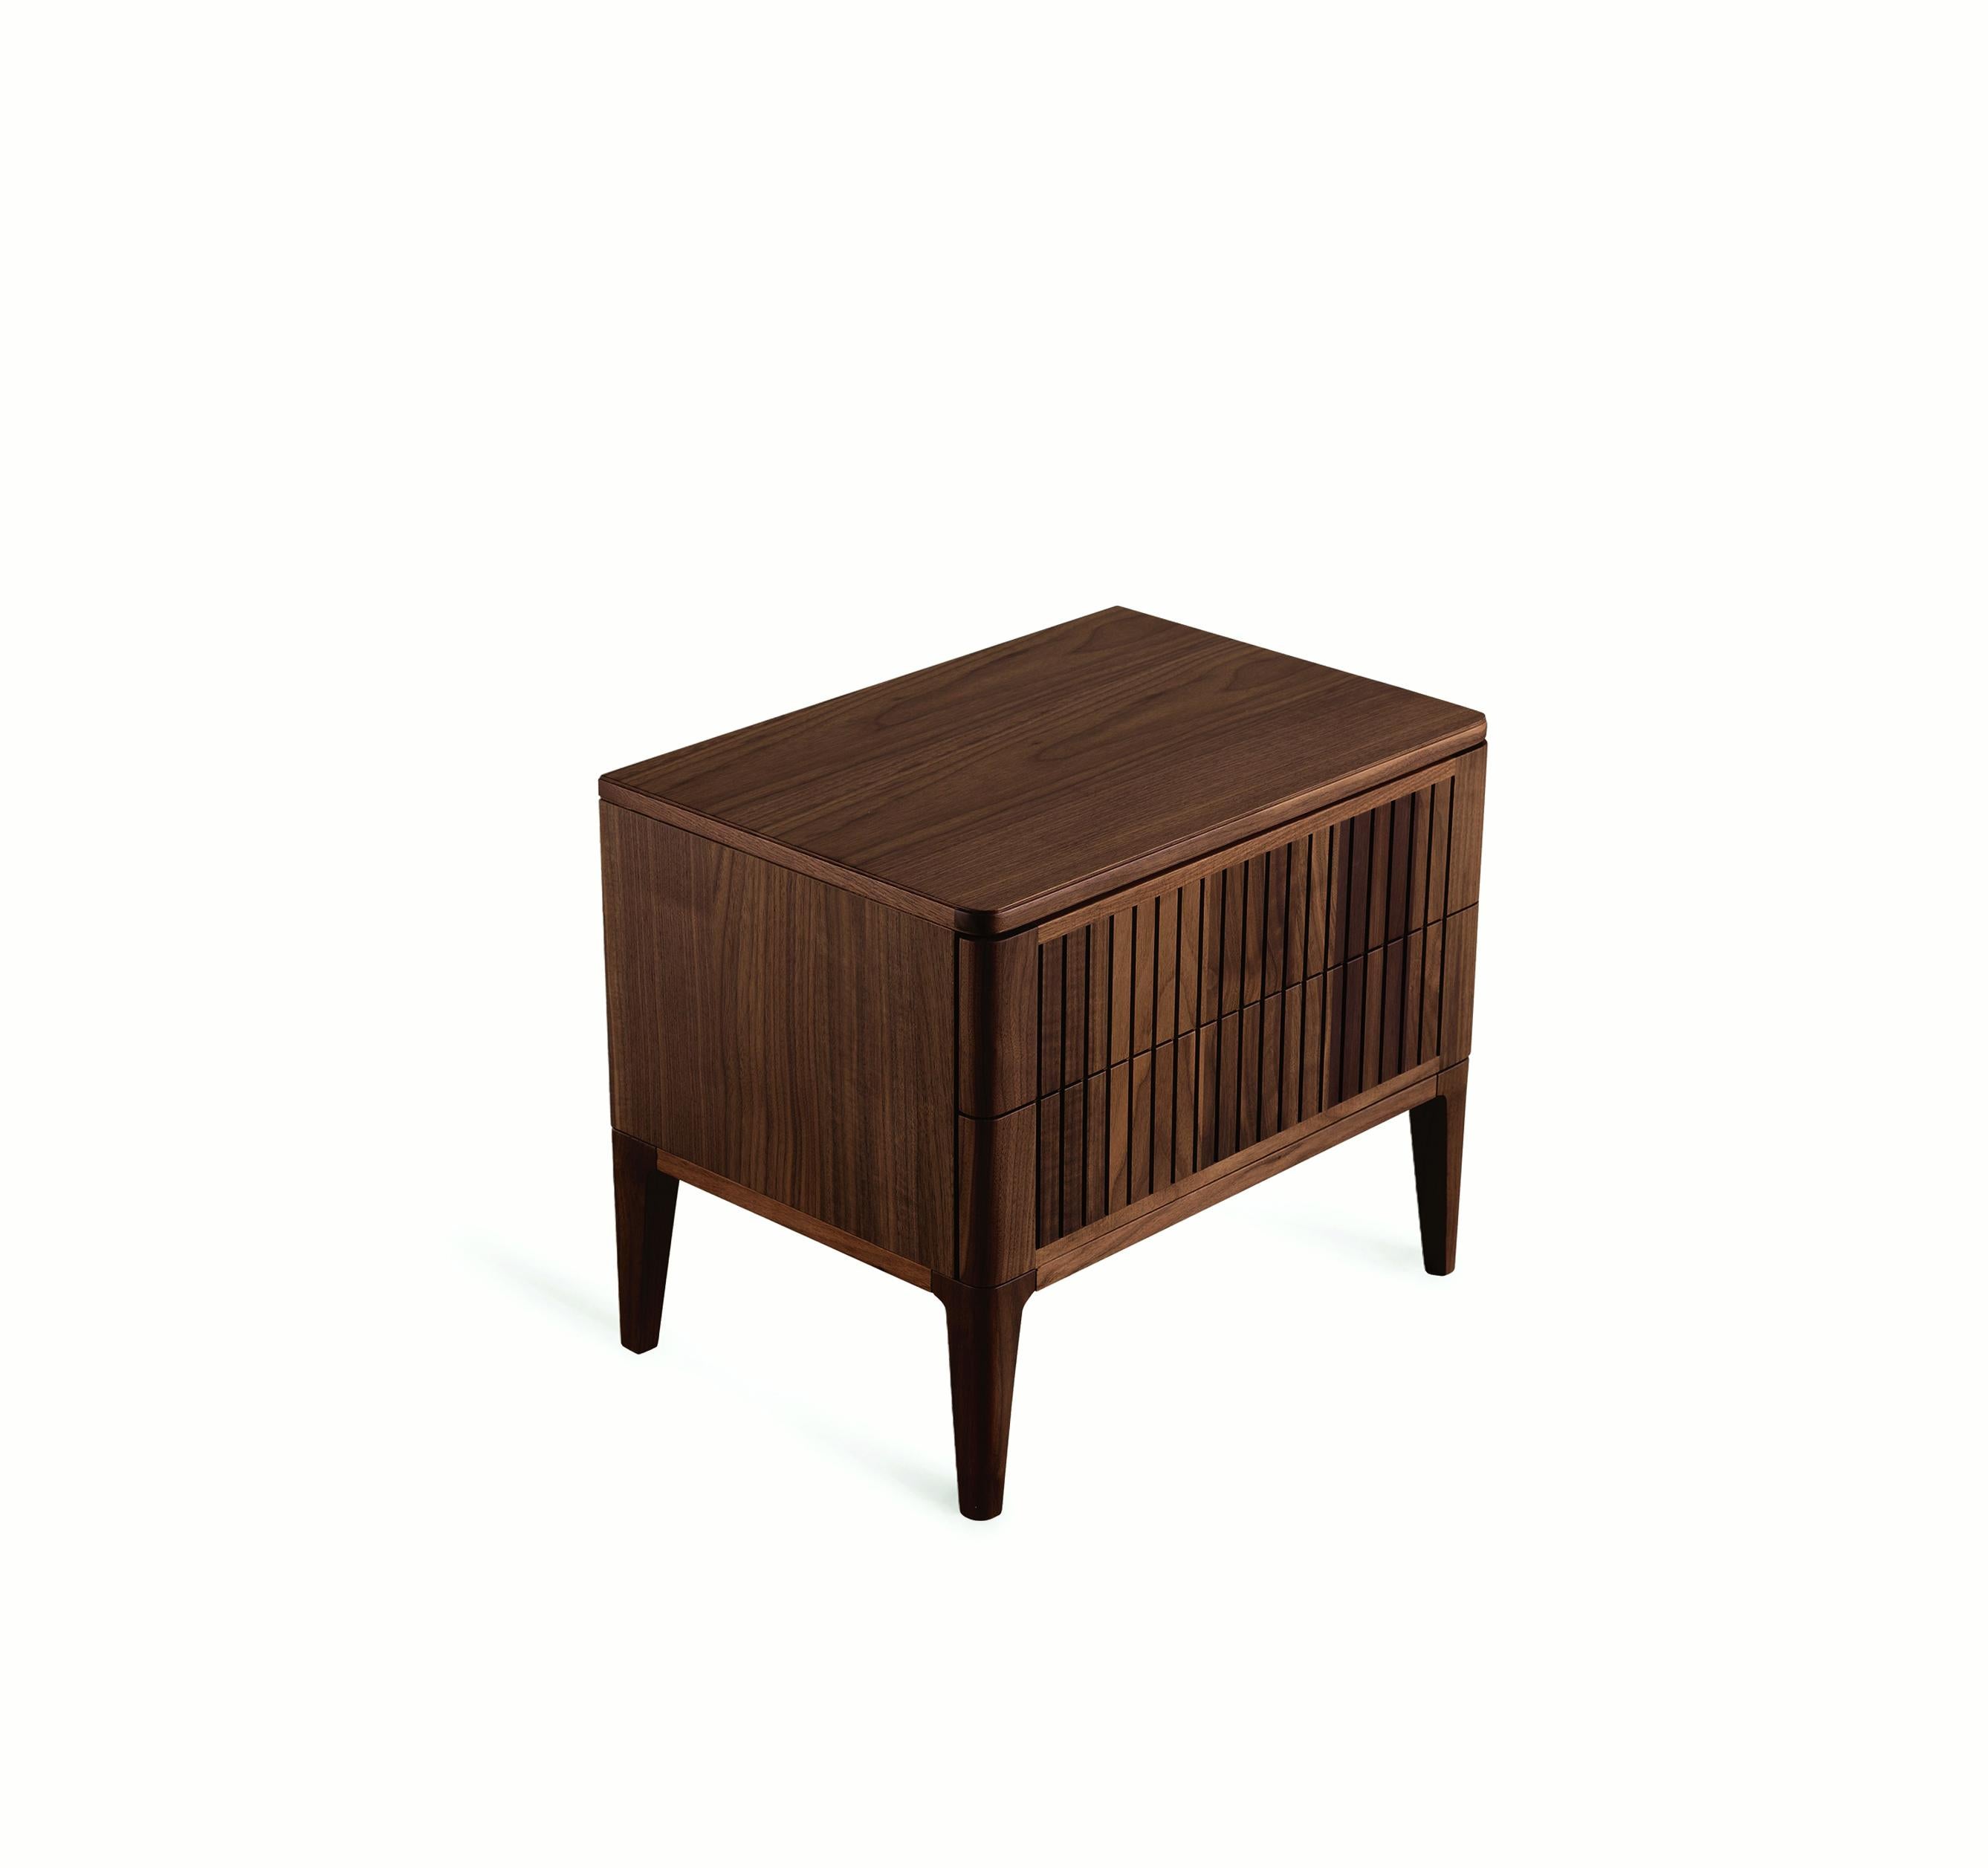 Modern Eleva Solid Wood Bedside table, Walnut in Hand-Made Natural Finish, Contemporary For Sale